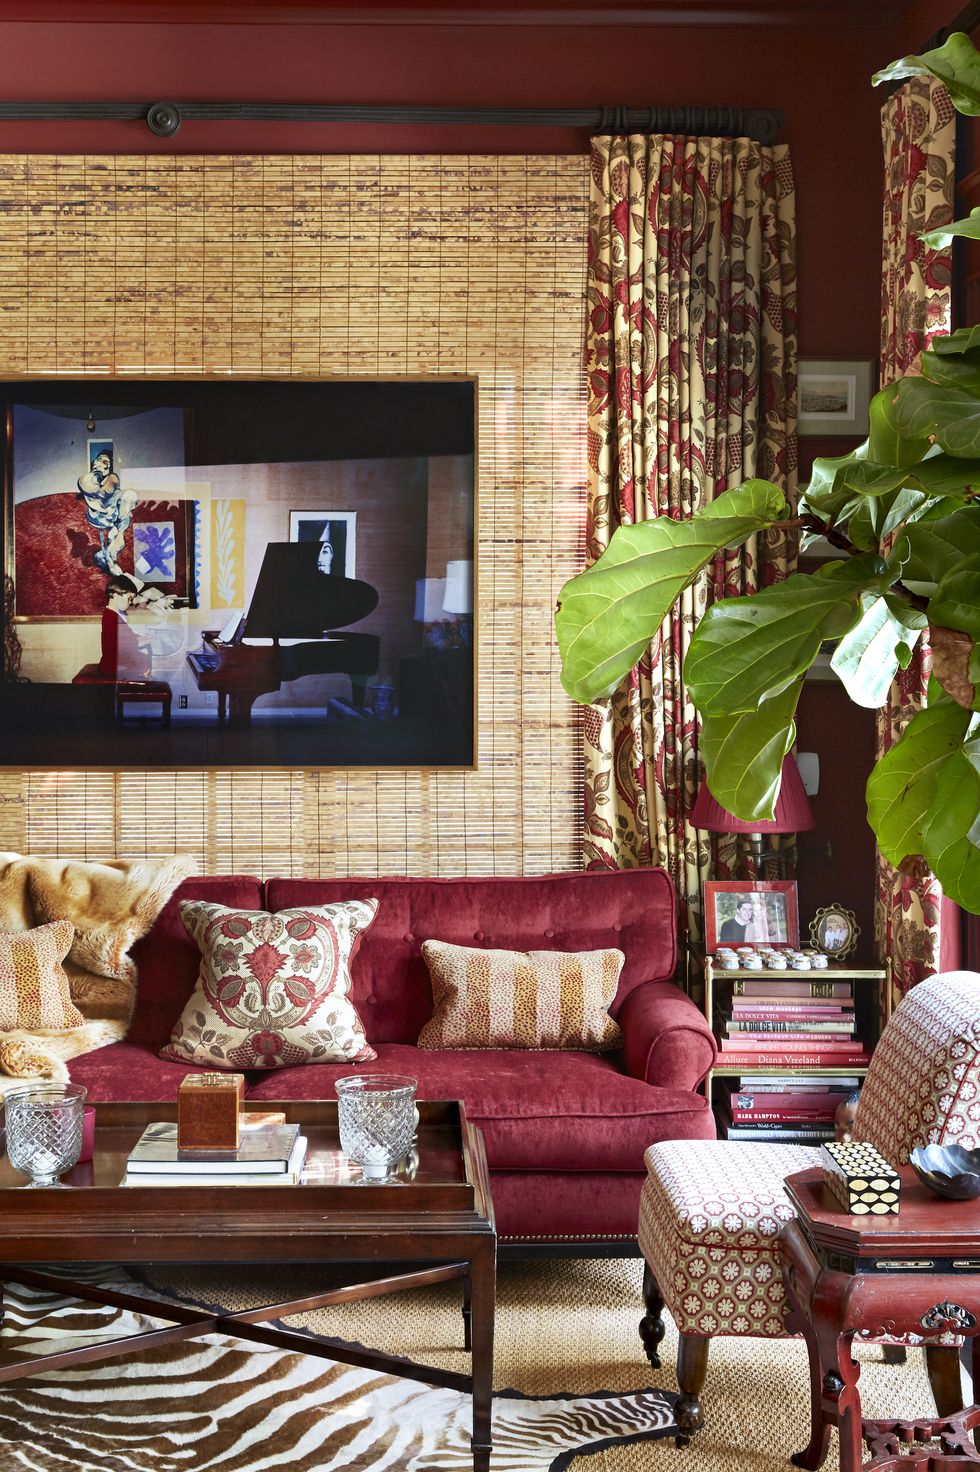 "Not￼￼hing transports like a deep red room," says McDonald of the sumptuous library. The window was covered with a bamboo shade to create an artful backdrop for the photograph by Augusta Wood. Walls in Benjamin Moore's Classic Burgundy. A Vaughan side table holds a lamp by Visual Comfort; a zebra-patterned hide tops a Stark rug.